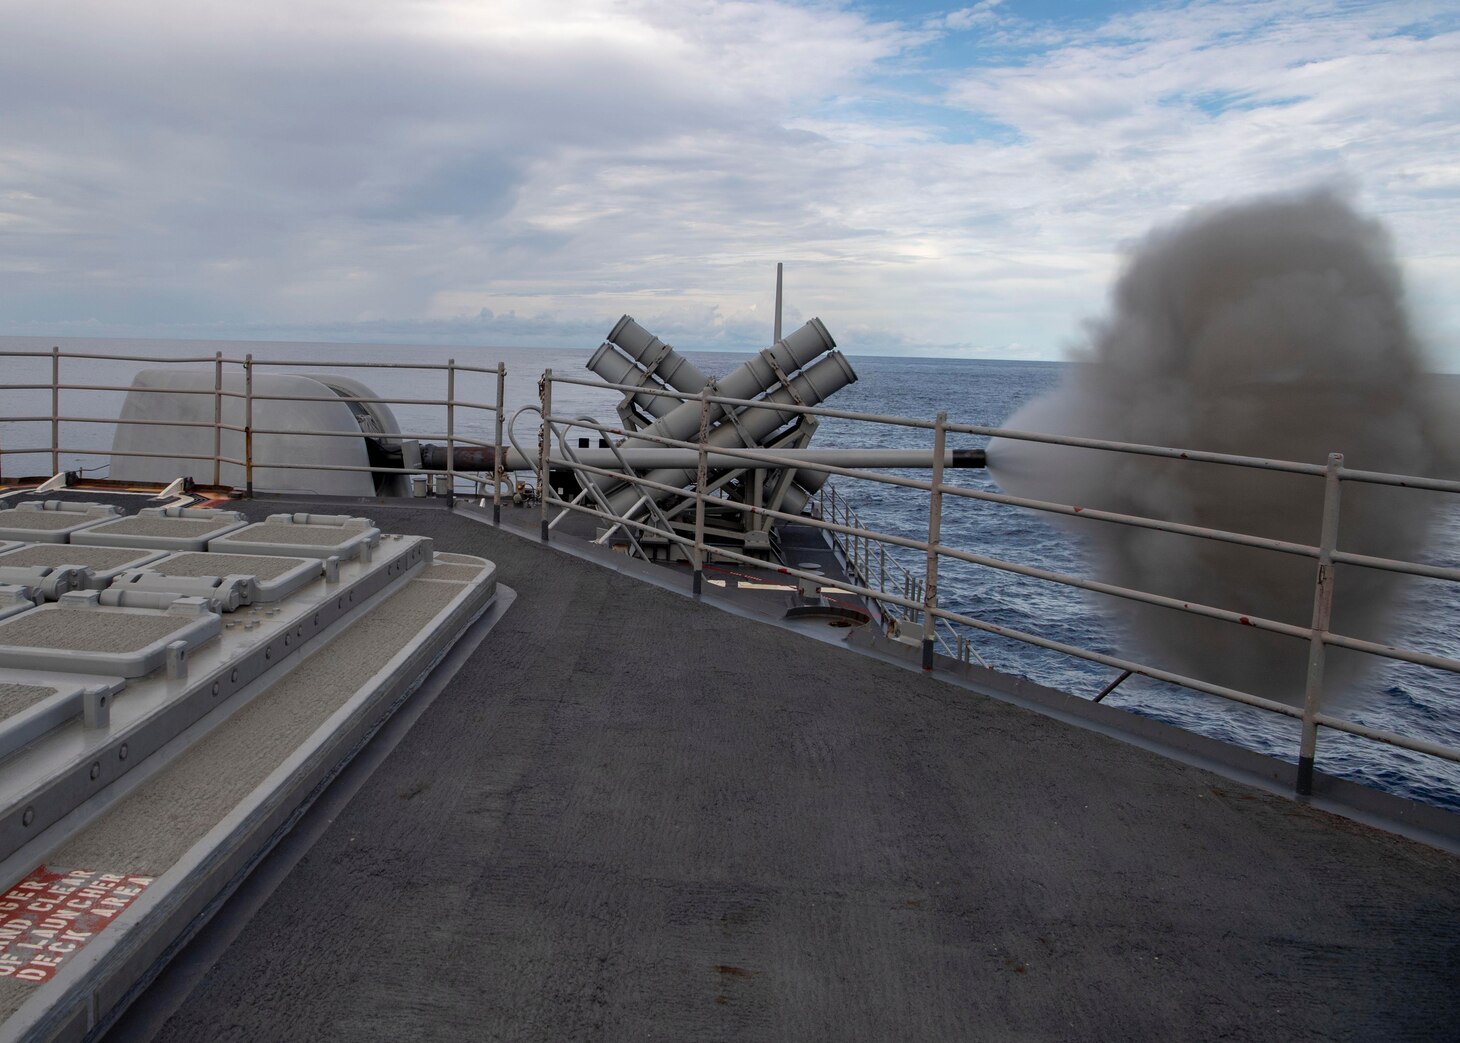 INDIAN OCEAN (March 12, 2021) The Ticonderoga-class guidided-missile cruiser USS Bunker Hill (CG 52) fires its Mark 45 5-inch gun during a surface target exercise March 12, 2021. Bunker Hill, part of the Theodore Roosevelt Carrier Strike Group, is on a scheduled deployment to the U.S. 7th Fleet area of operations. As the U.S. Navy’s largest forward-deployed fleet, 7th Fleet routinely operates and interacts with 35 maritime nations while conducting missions to preserve and protect a free and open Indo-Pacific. (U.S. Navy photo by Mass Communication Specialist 2nd Class Brandie Nuzzi)